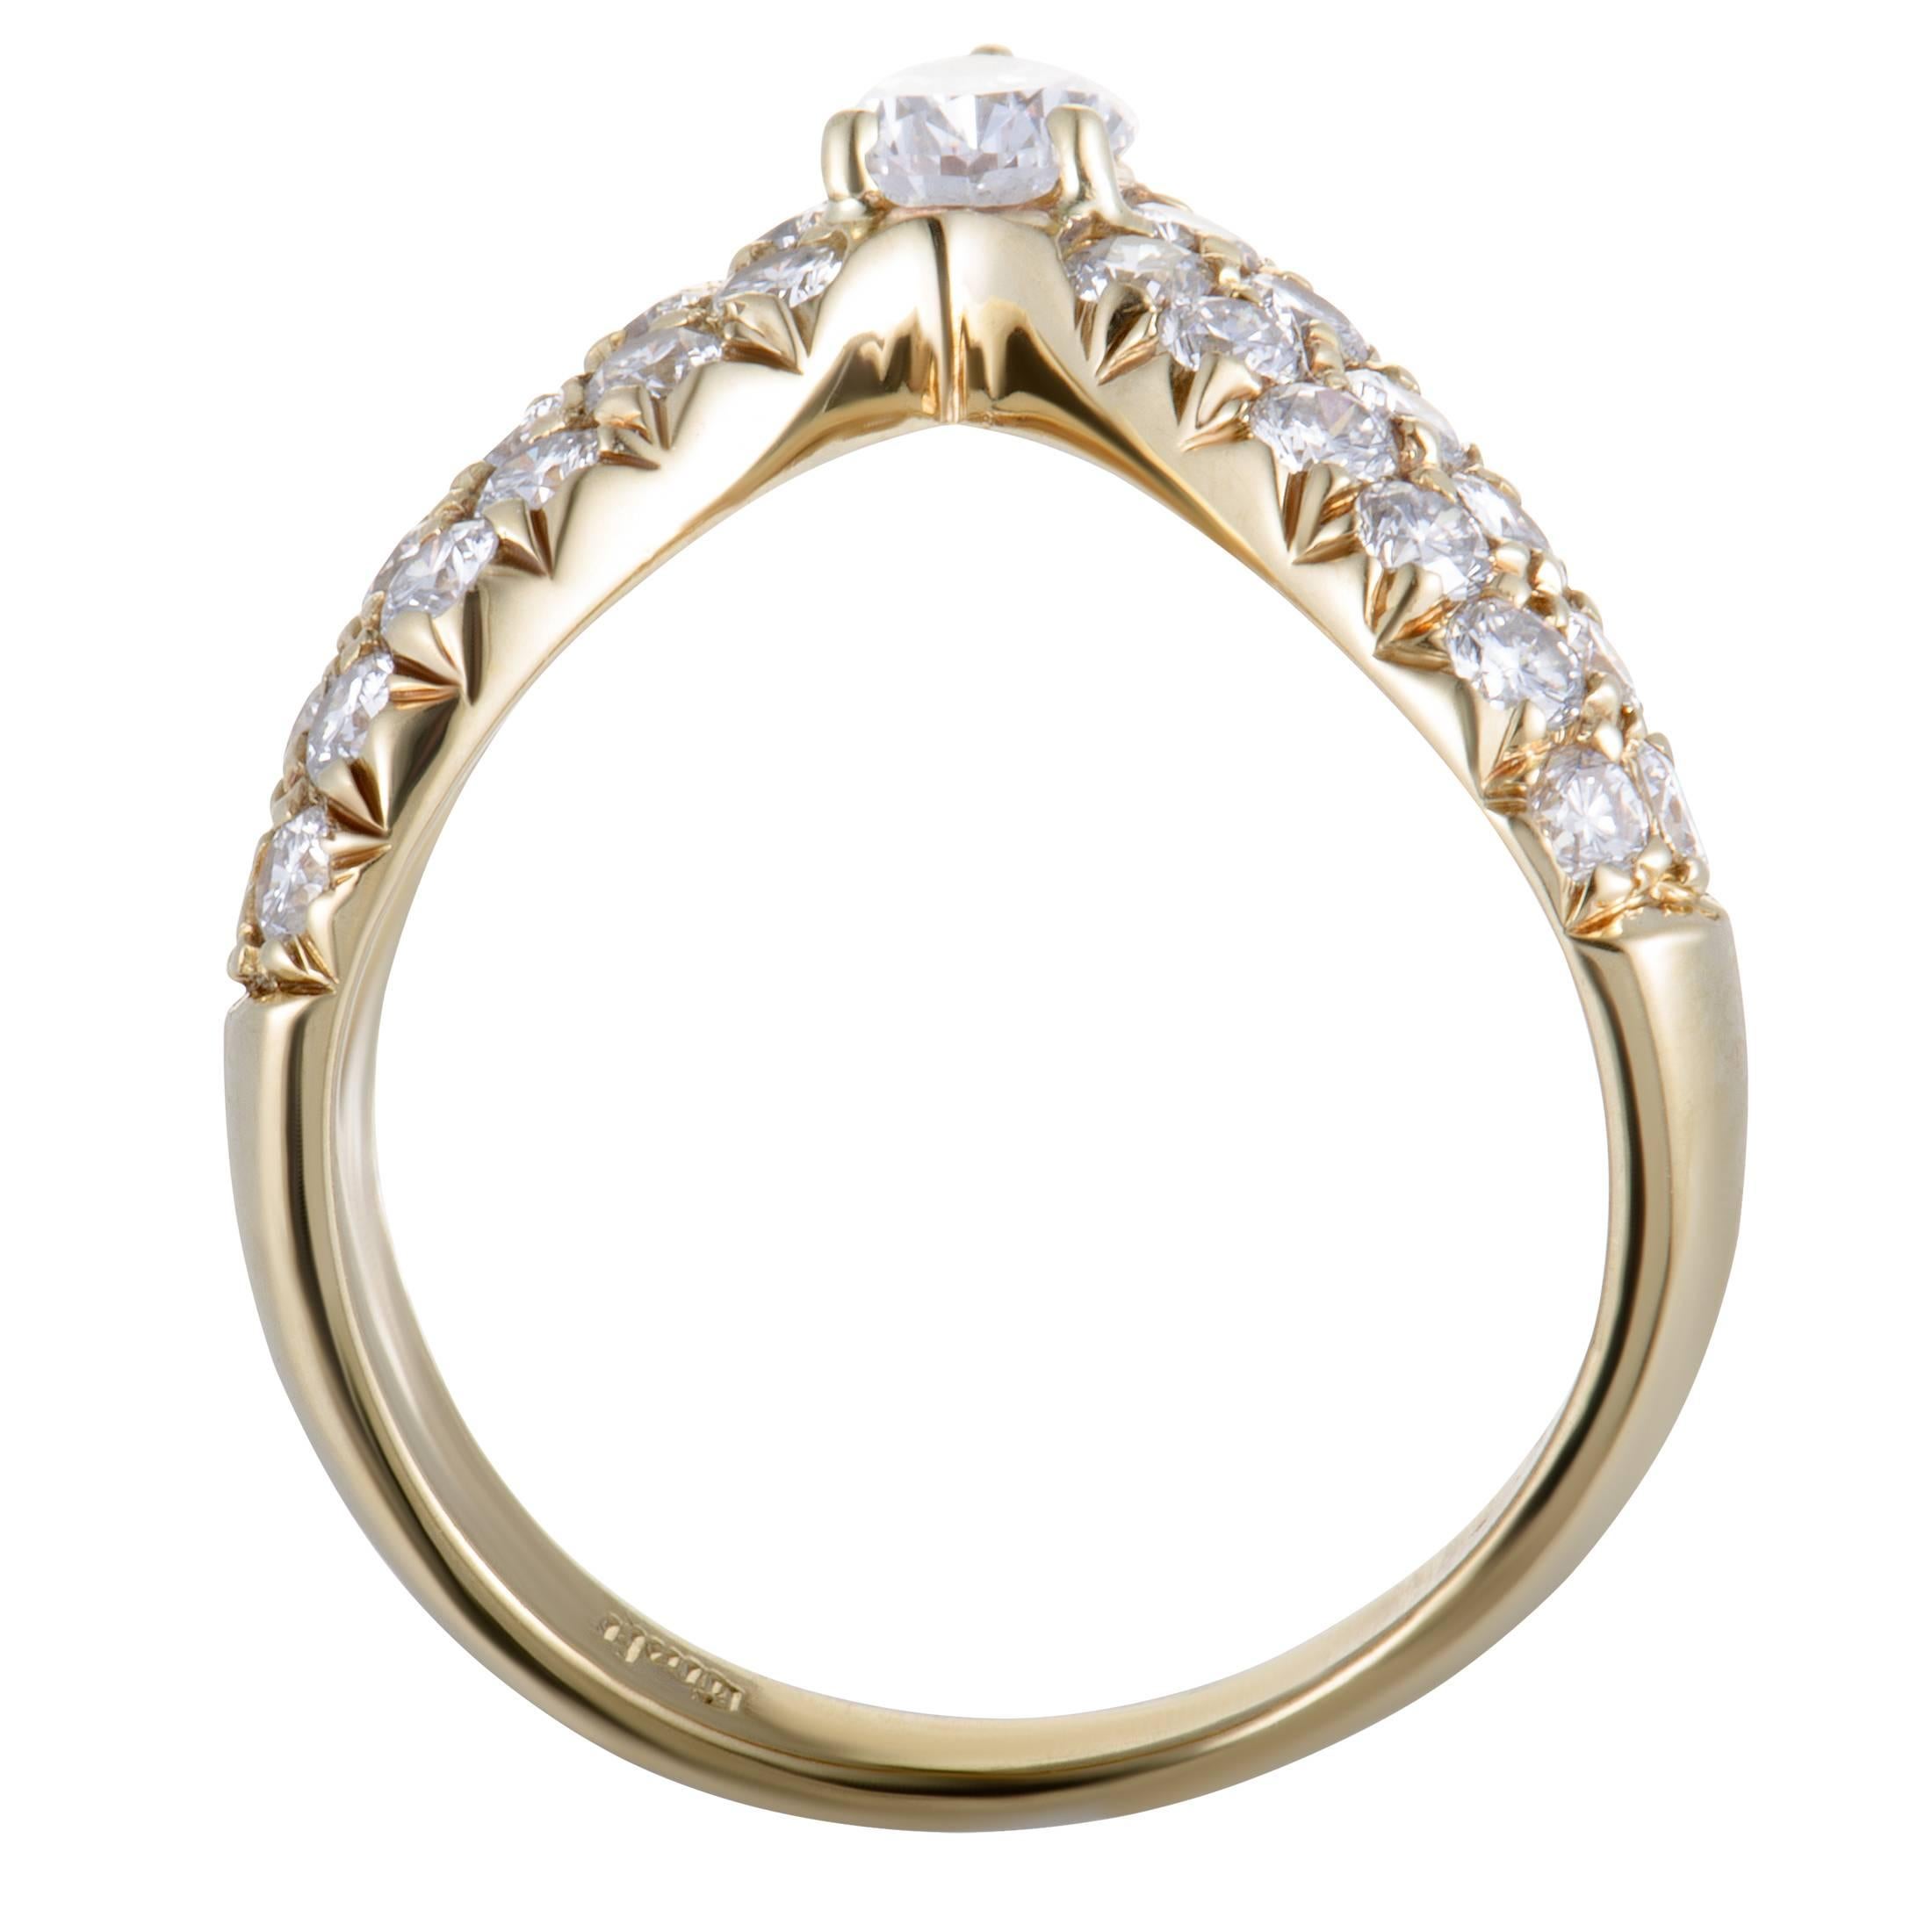 Give a distinctly prestigious tone to your look with this splendid ring, a Graff design marvelously crafted from elegant 18K yellow gold. The ring is lavishly set with colorless (grade F) diamonds of VS1 clarity that weigh approximately 1.25 carats